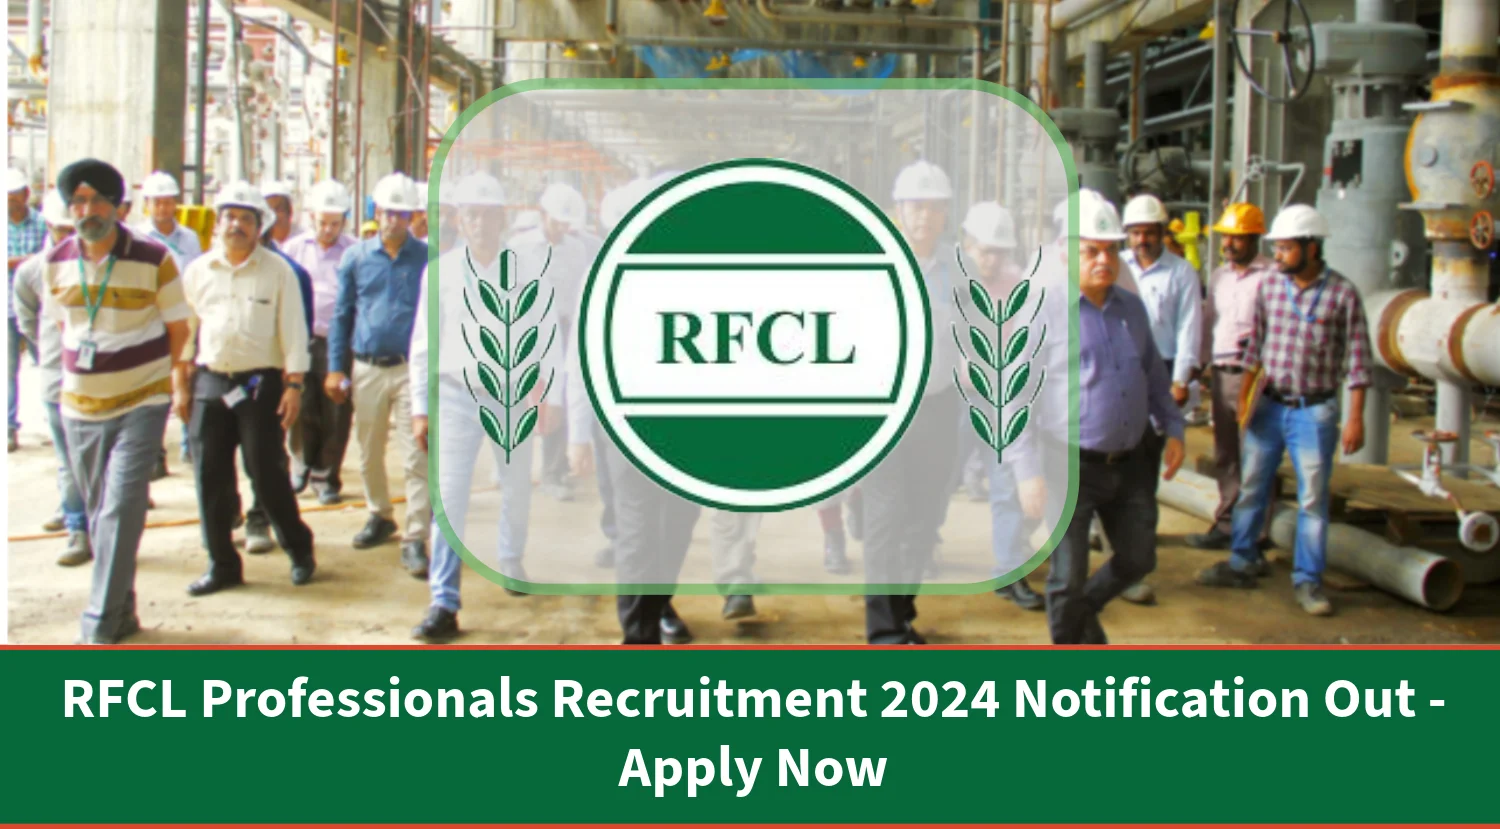 RFCL Professionals Recruitment 2024 Notification Out